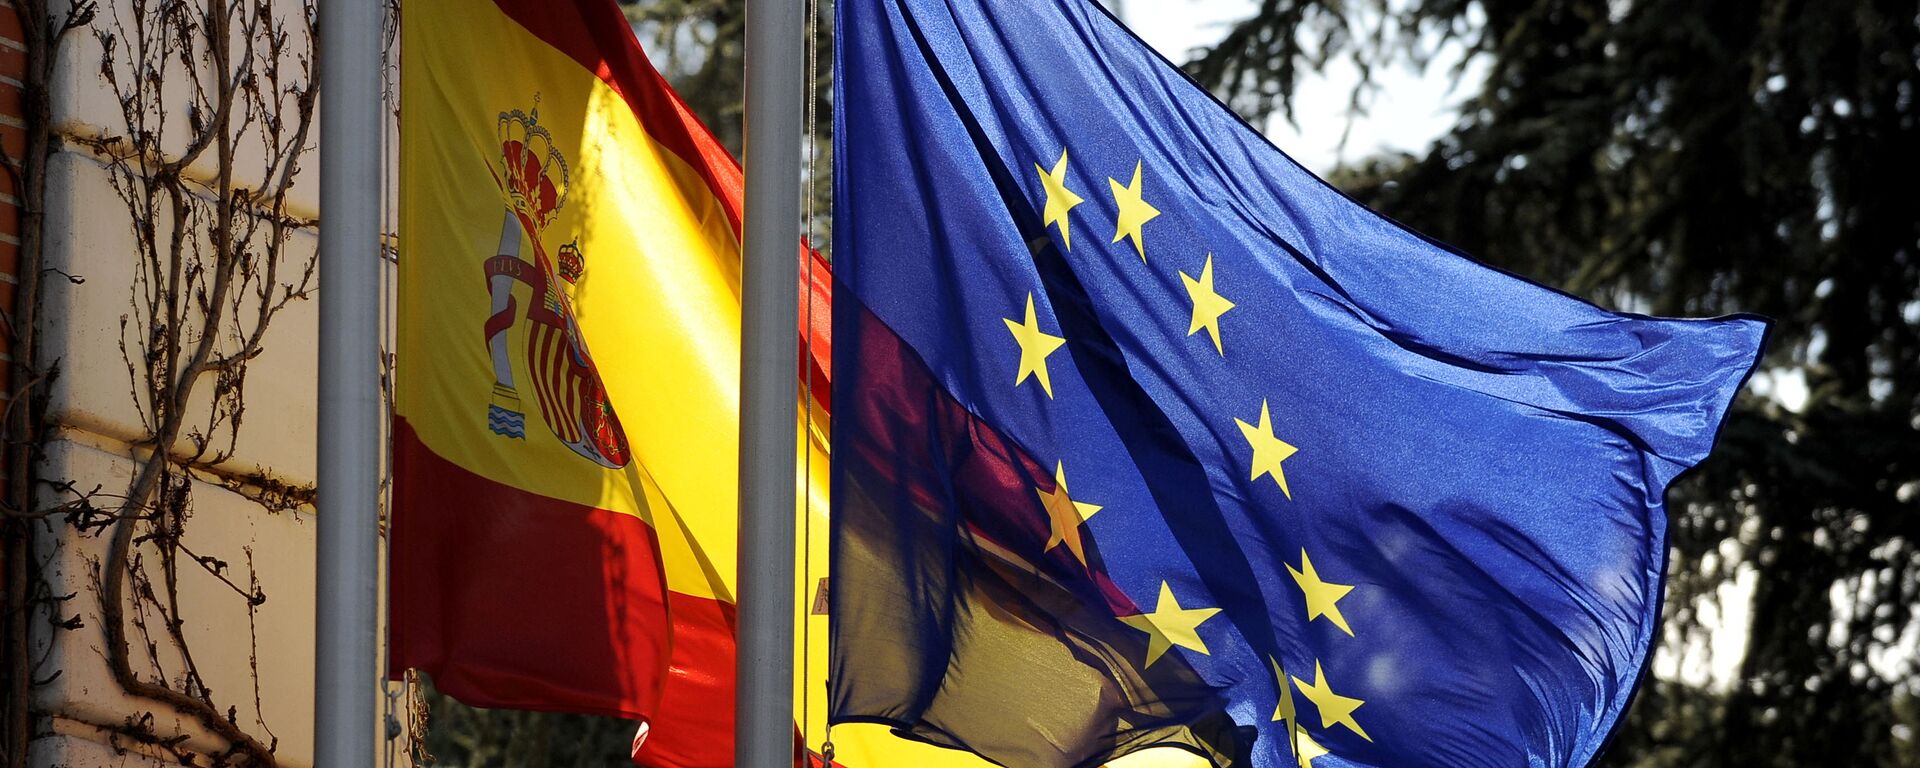 The Spanish flag and the European Union flag fly in front of the Moncloa palace in Madrid on January 8, 2010 - Sputnik Mundo, 1920, 22.06.2022